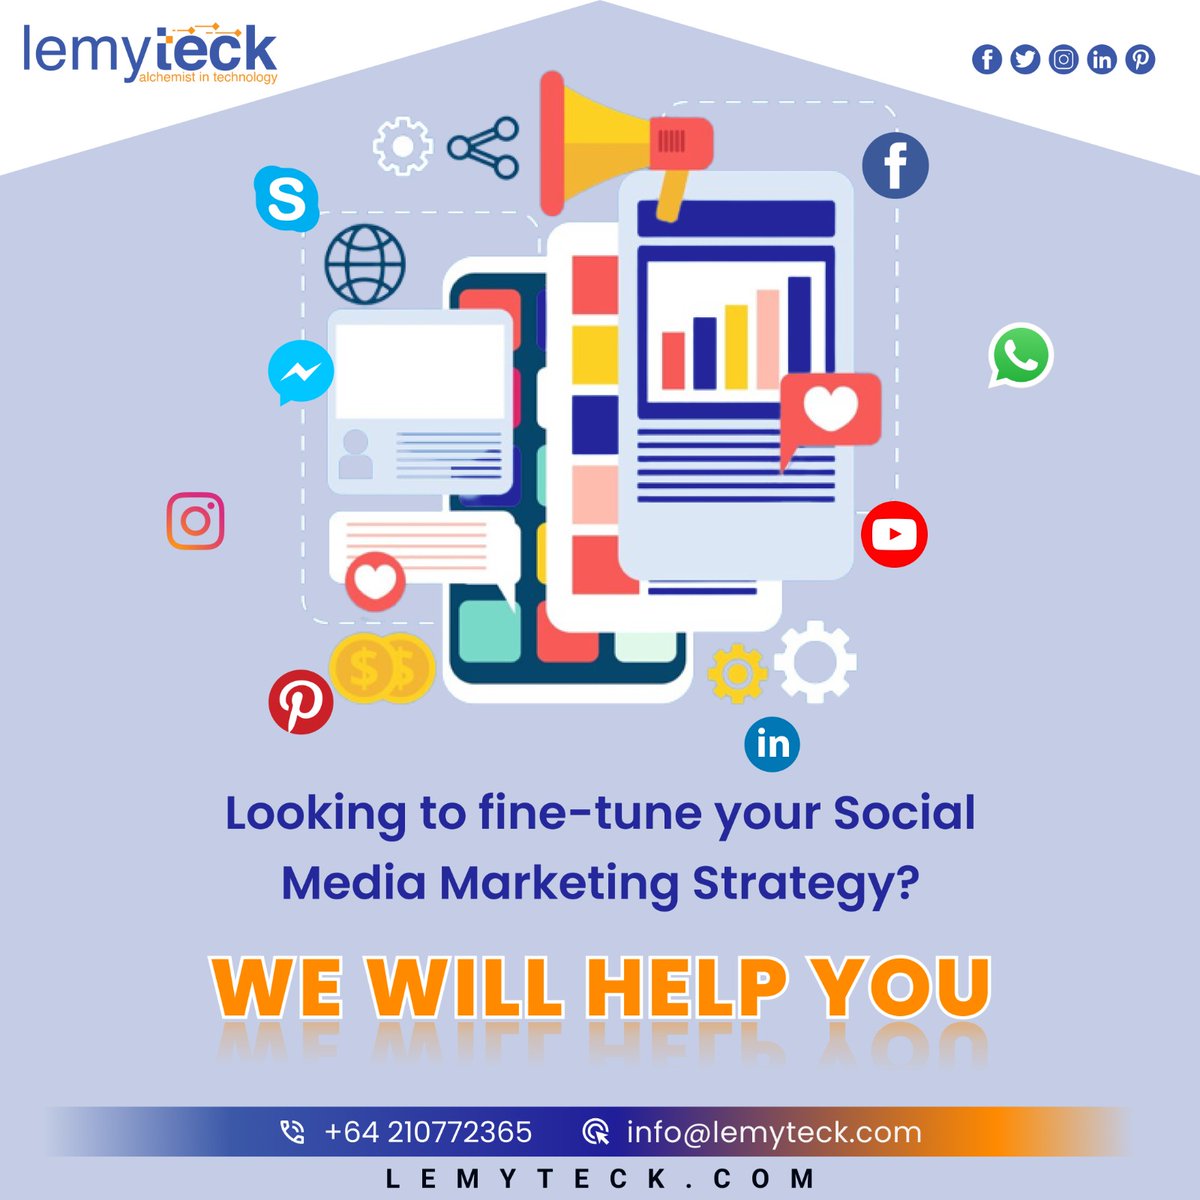 🚀Let us take your social media marketing to the next level with our expert team. 📈We'll fine-tune your strategy, from content creation to analytics, to amplify your brand online. Contact us today!🌟 #lemyteck #DigitalNZLifestyle #KiwisOnSocial #NZInfluence #NZBrandBoost